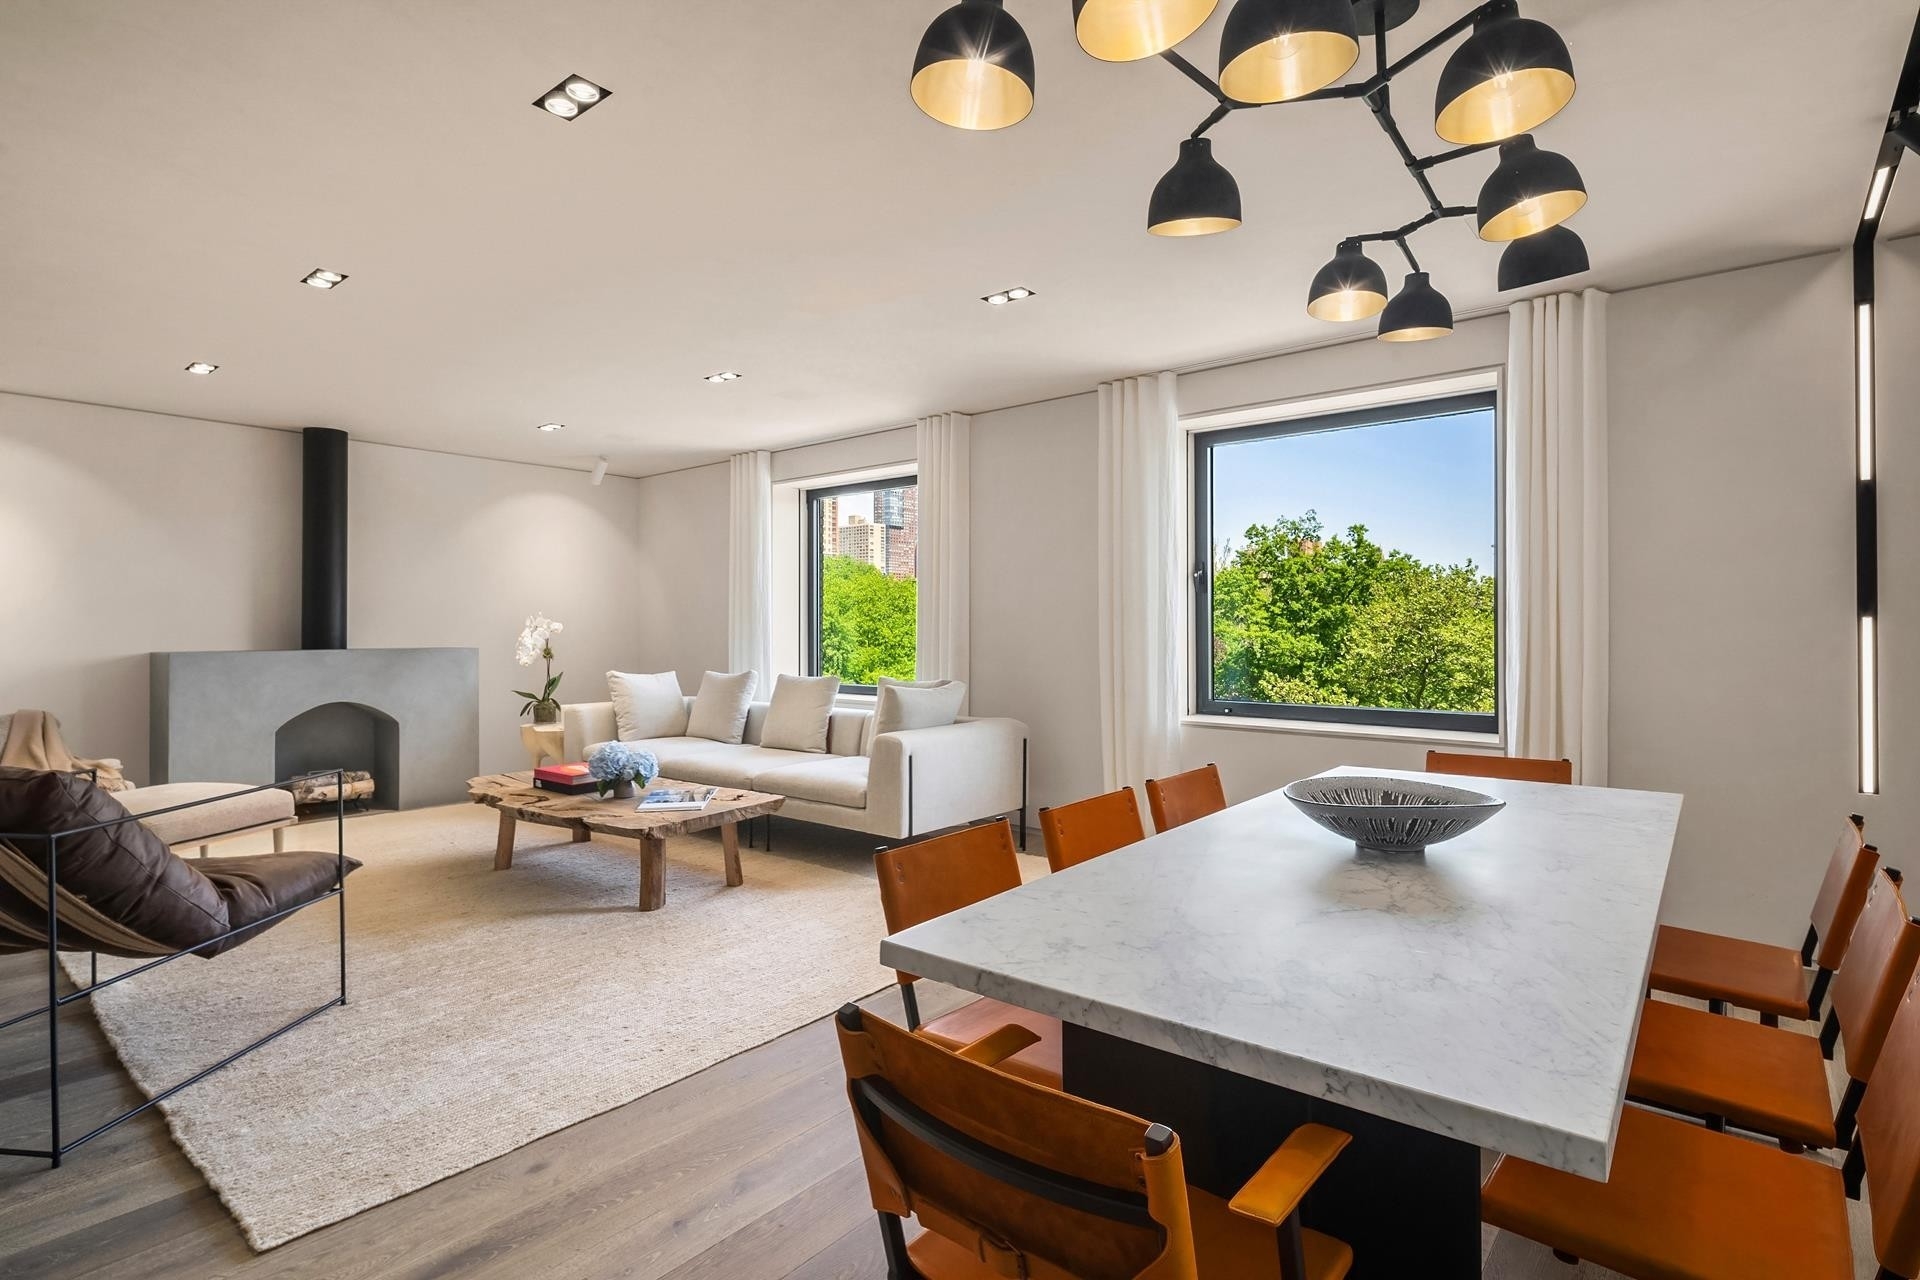 Rentals at Essex House, 160 CENTRAL PARK S, 615 Central Park South, New York, New York 10019